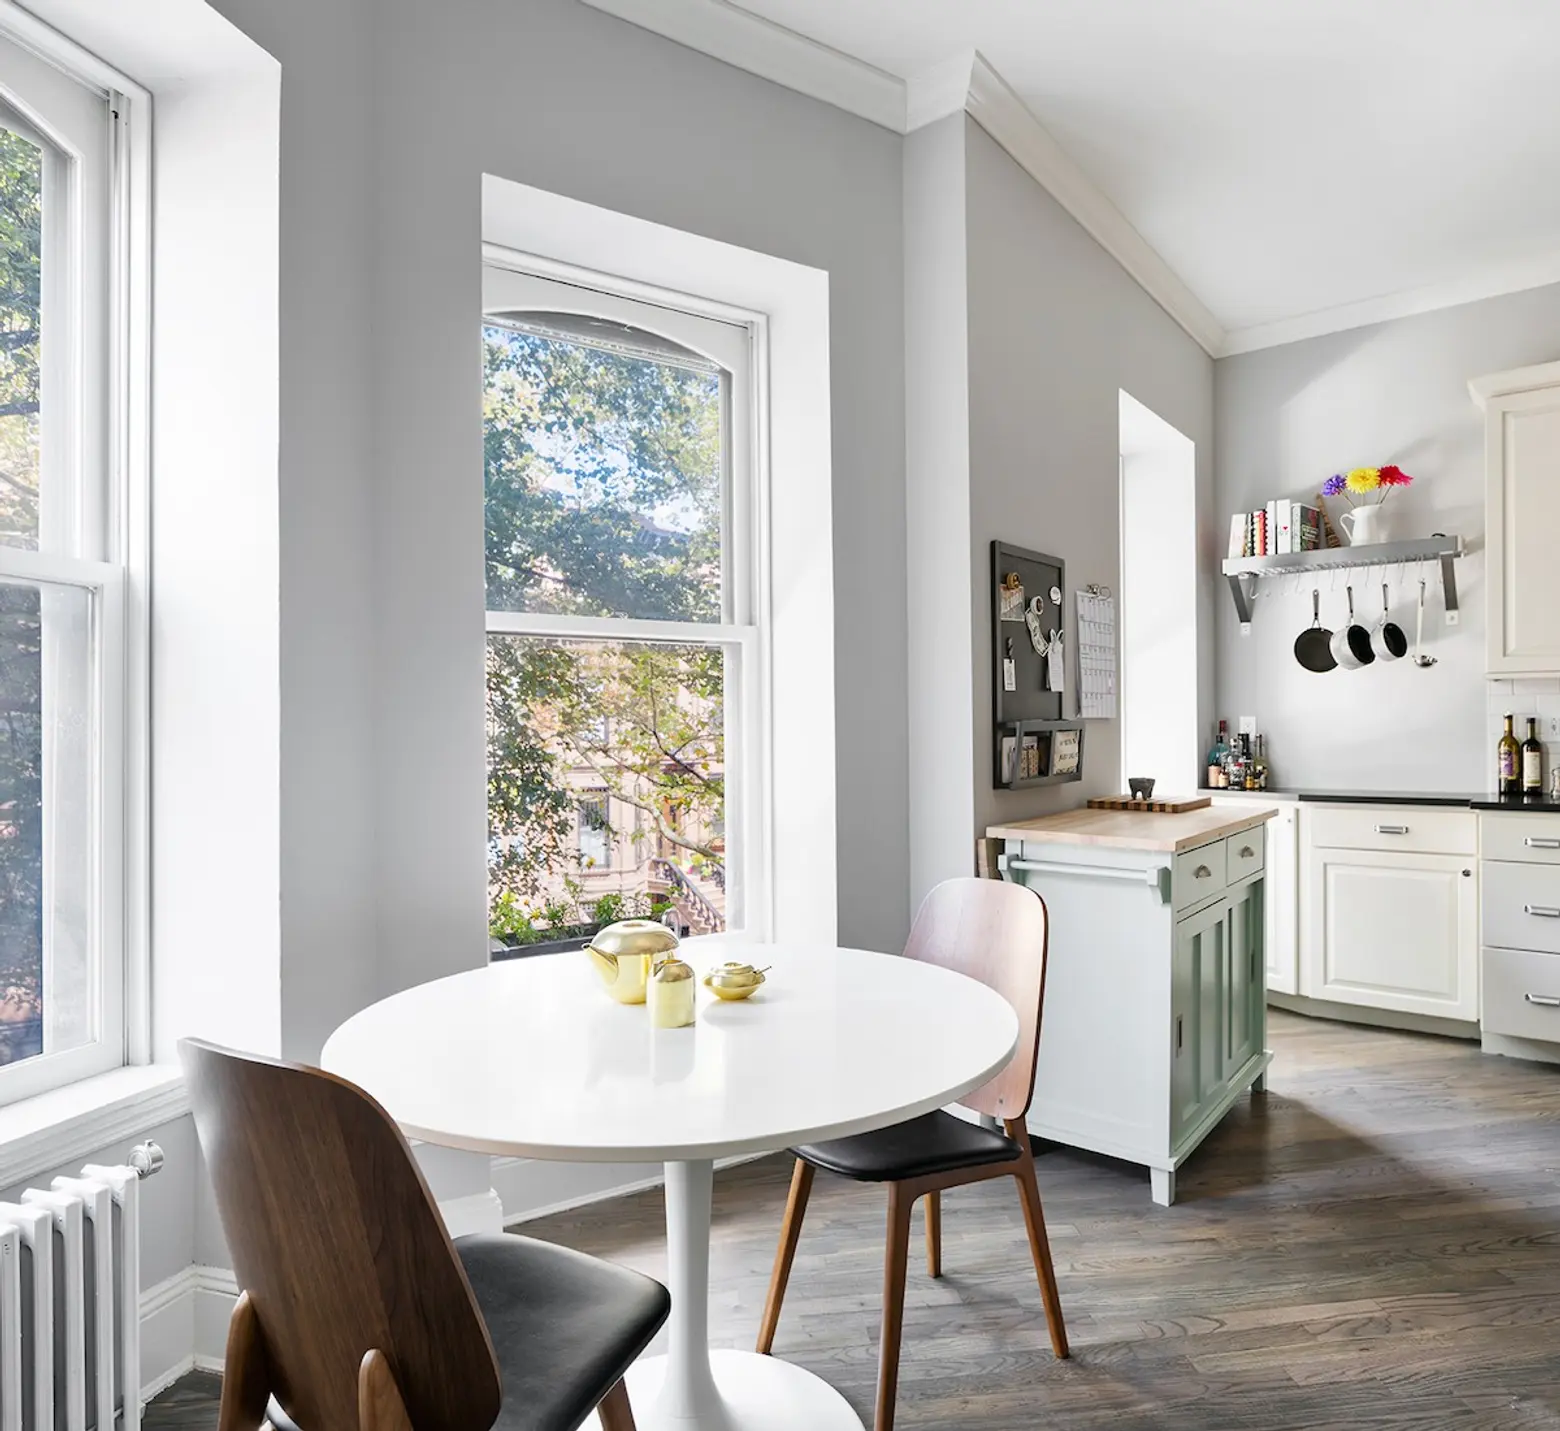 134 Lincoln Place, Cool Listings, Park Slope, Co-op, Brooklyn Co-op for sale,